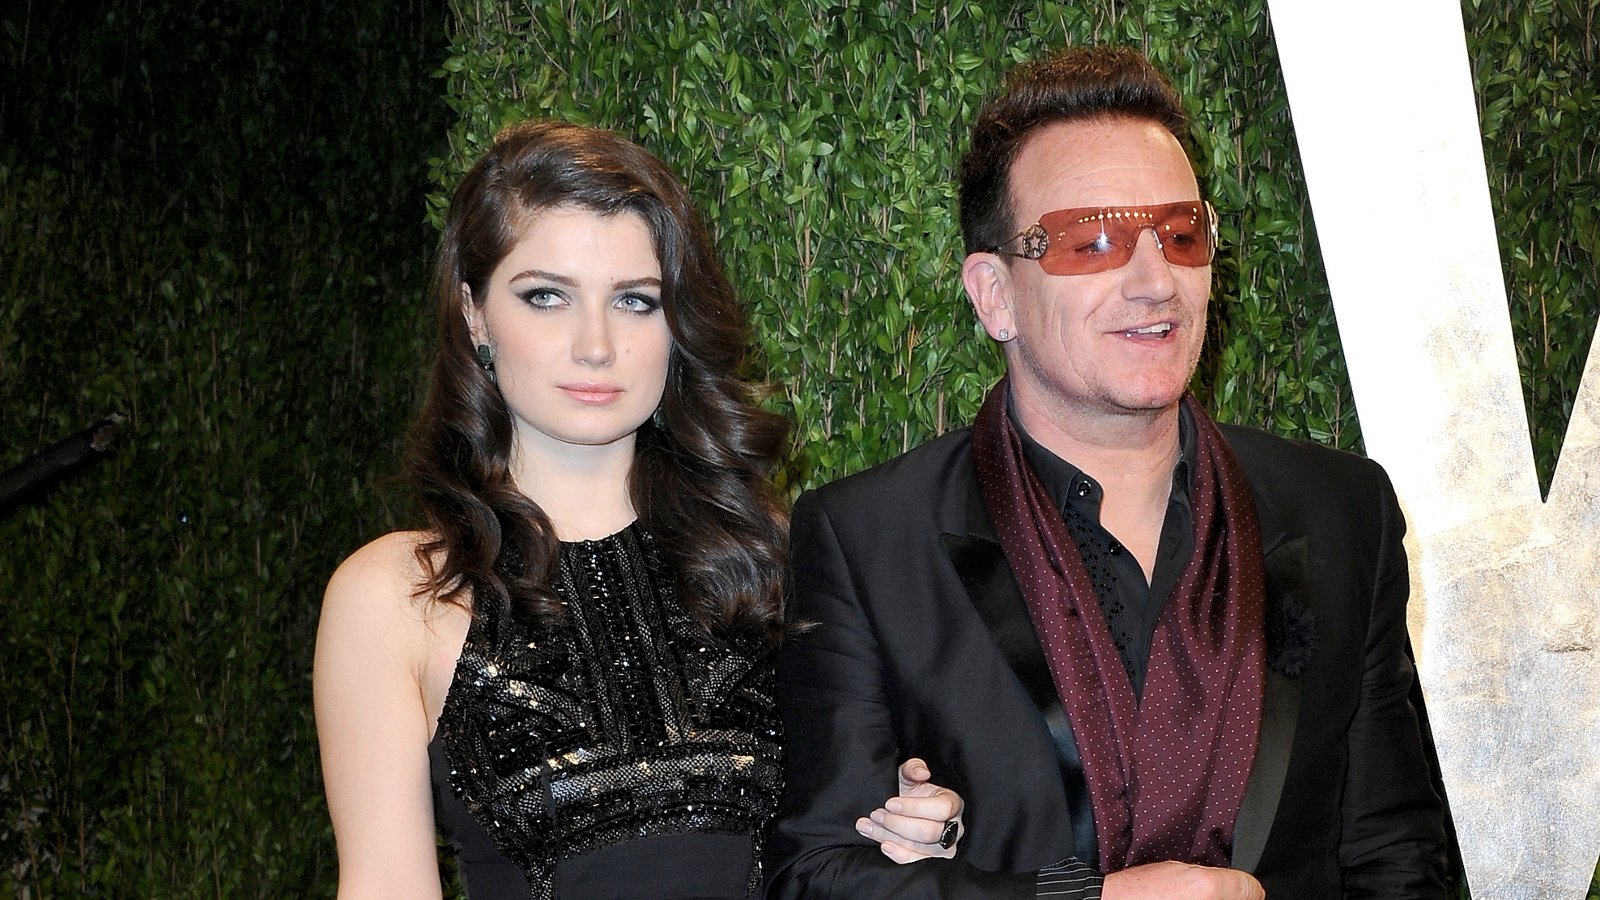 Eve Hewson 'very opinionated' about U2's music